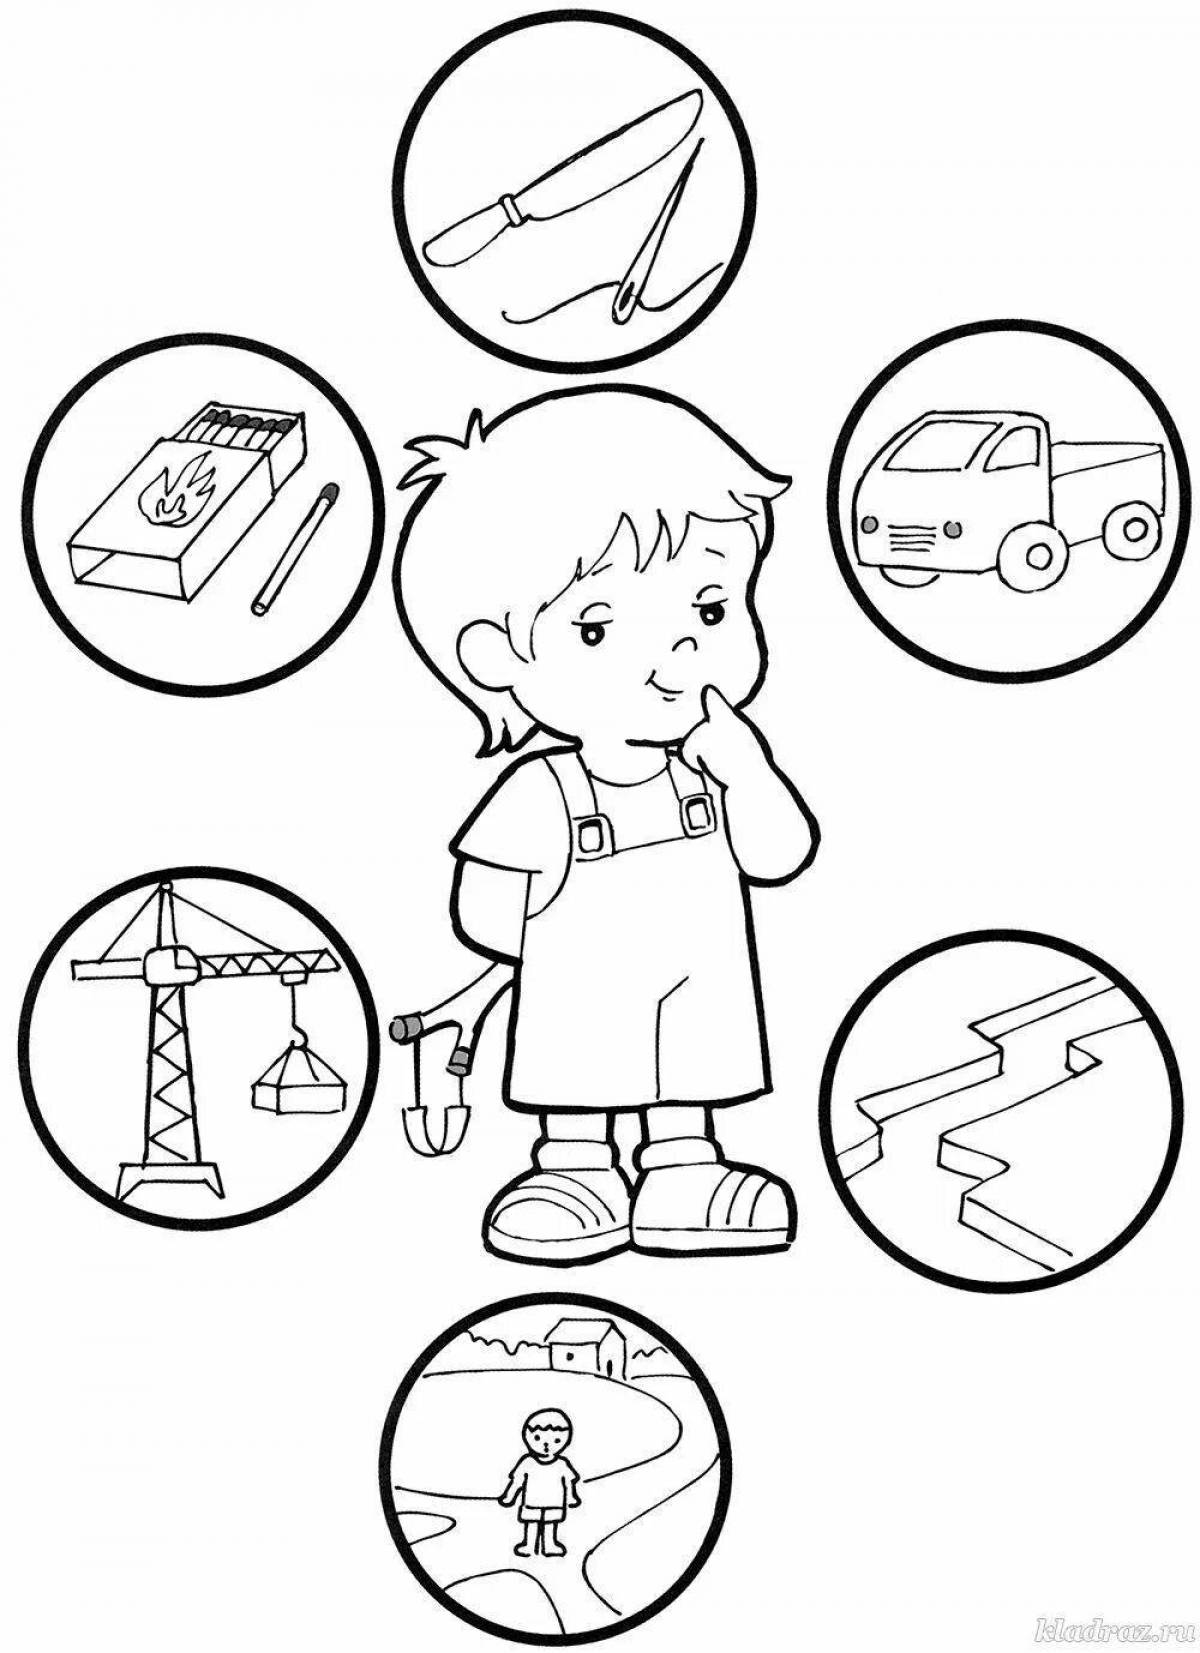 Safety rules coloring page